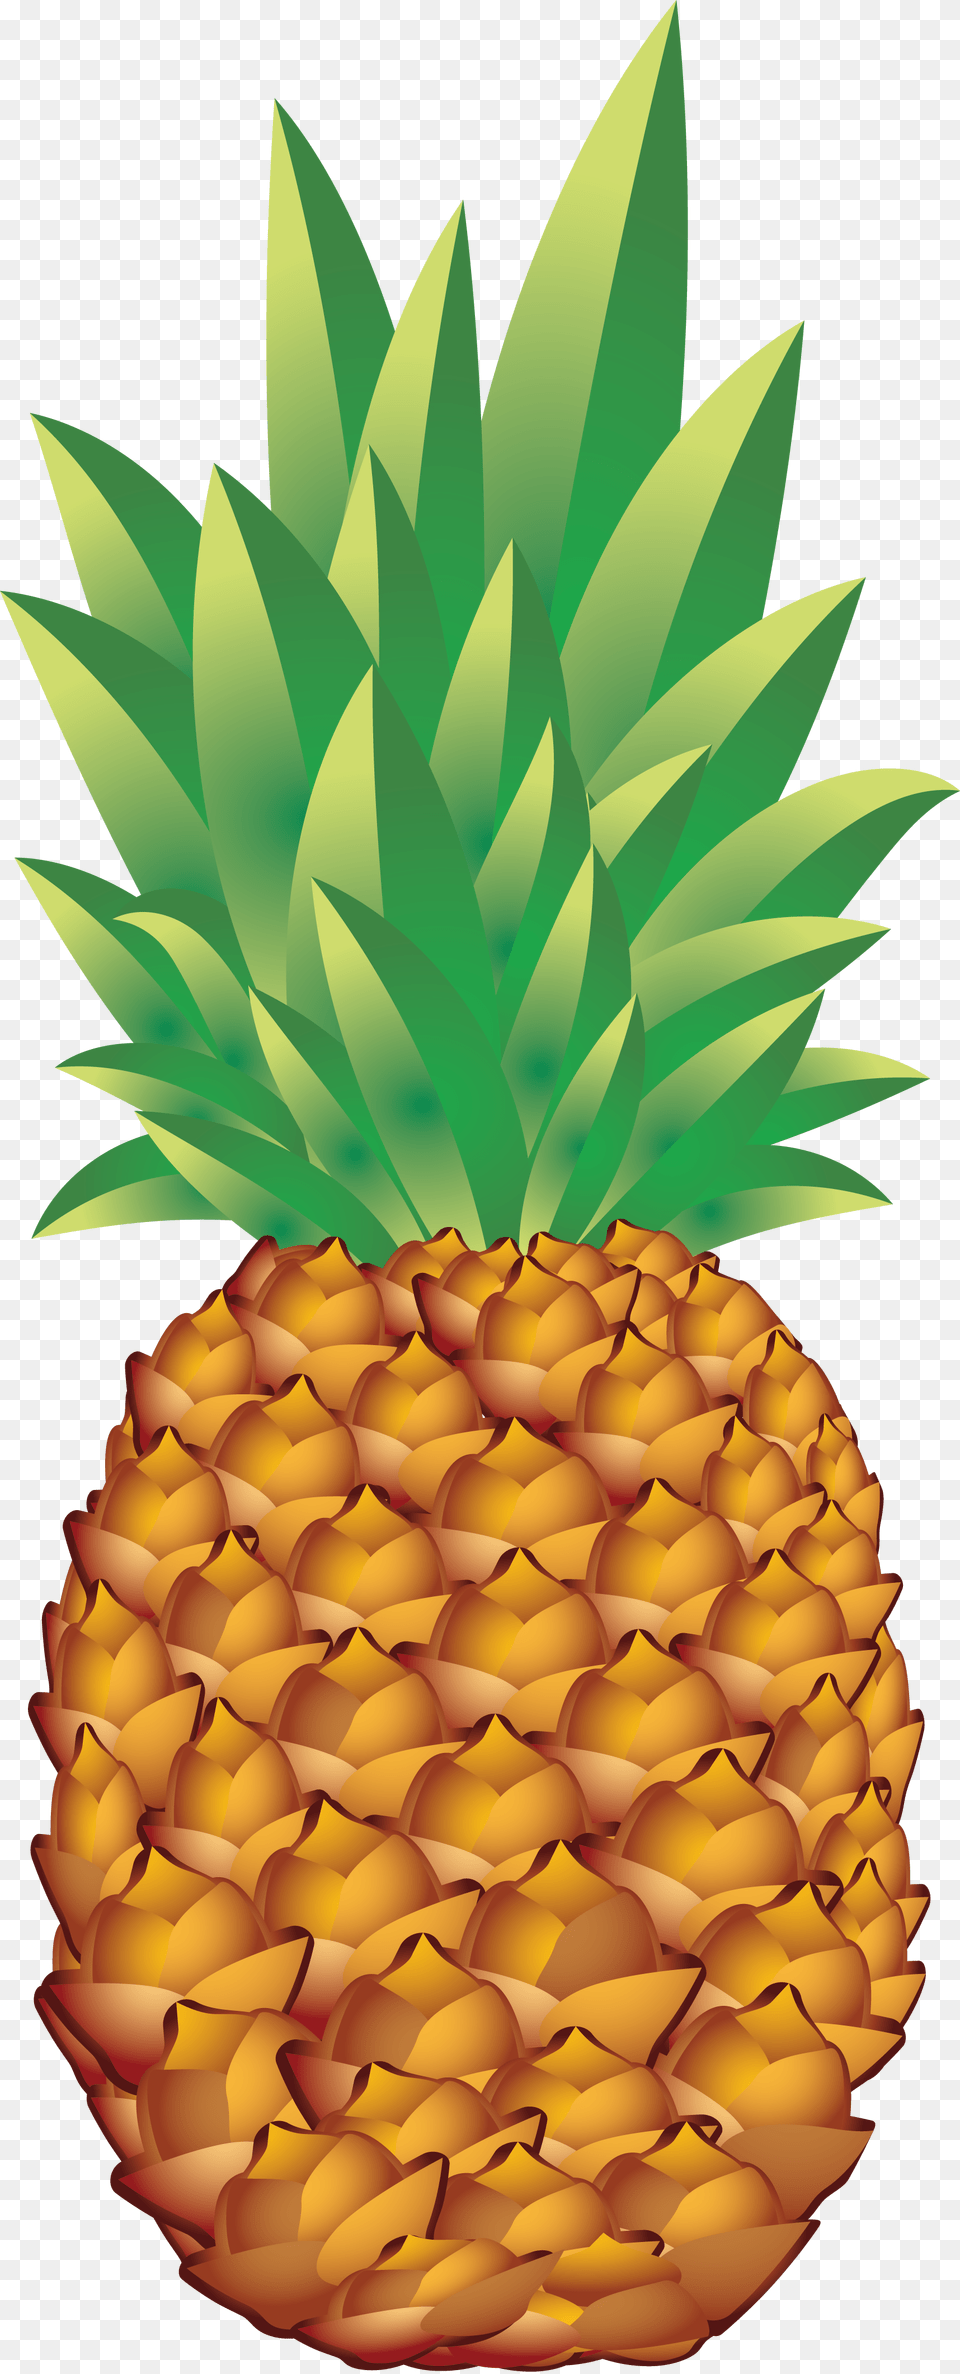 Pineapple Vector Clipart Image Pineapple Clipart Pineapple, Food, Fruit, Plant, Produce Free Transparent Png